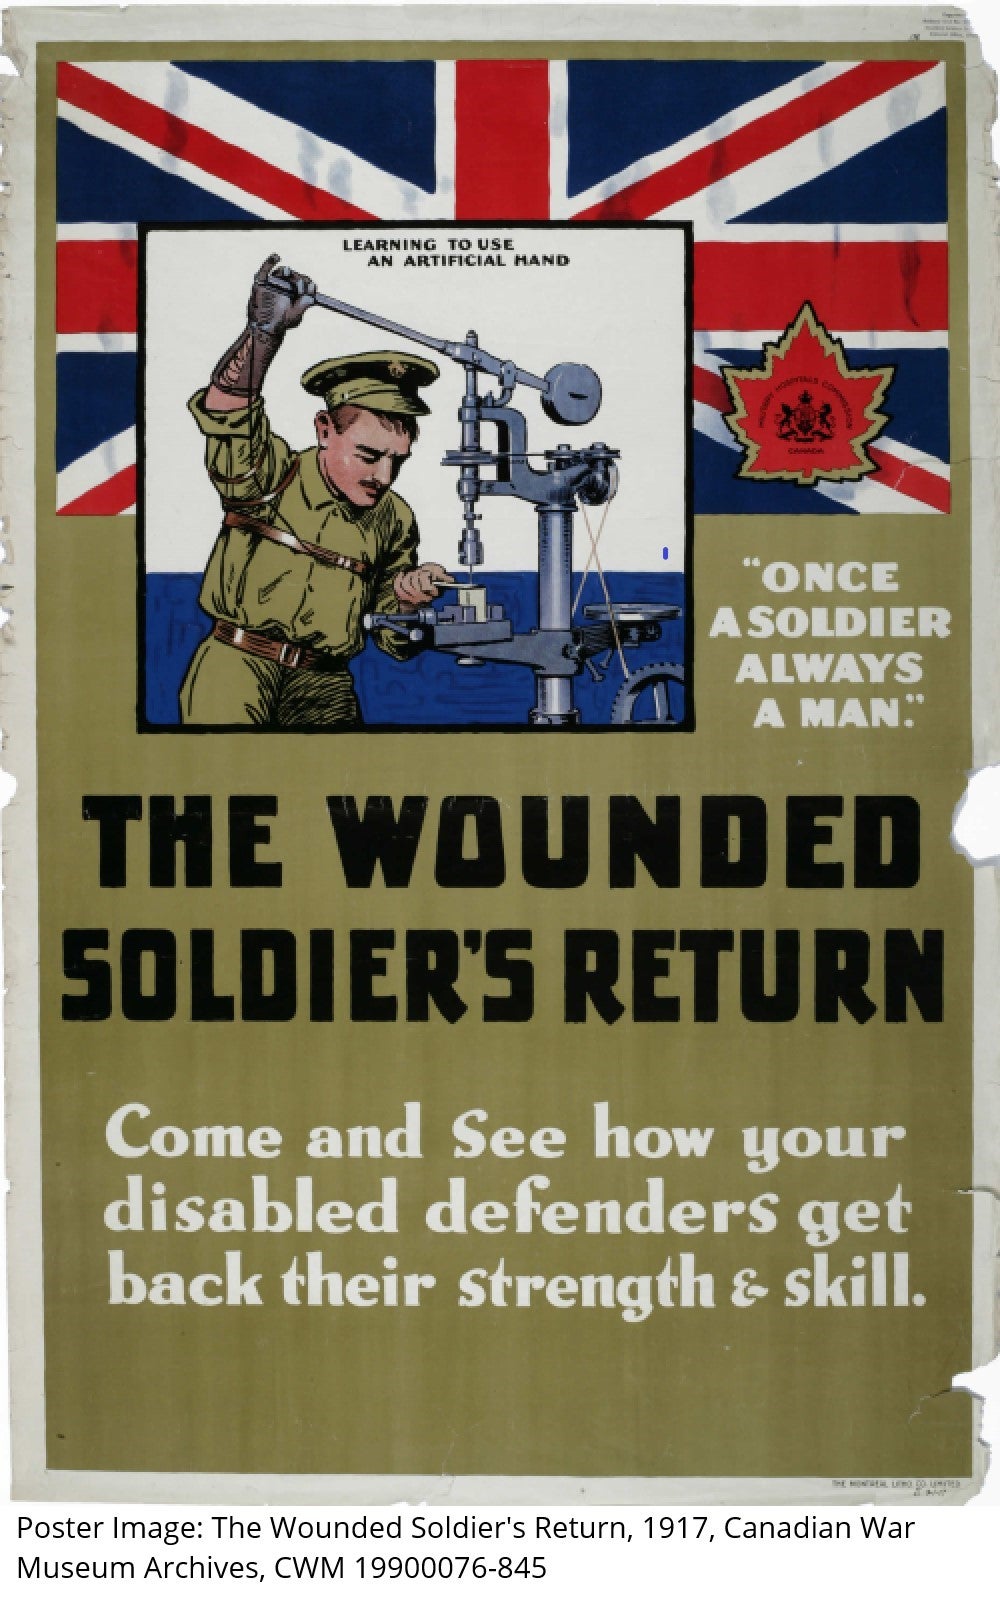 Poster Image: The Wounded Soldier's Return, 1917, Canadian War Museum Archives, CWM 19900076-845